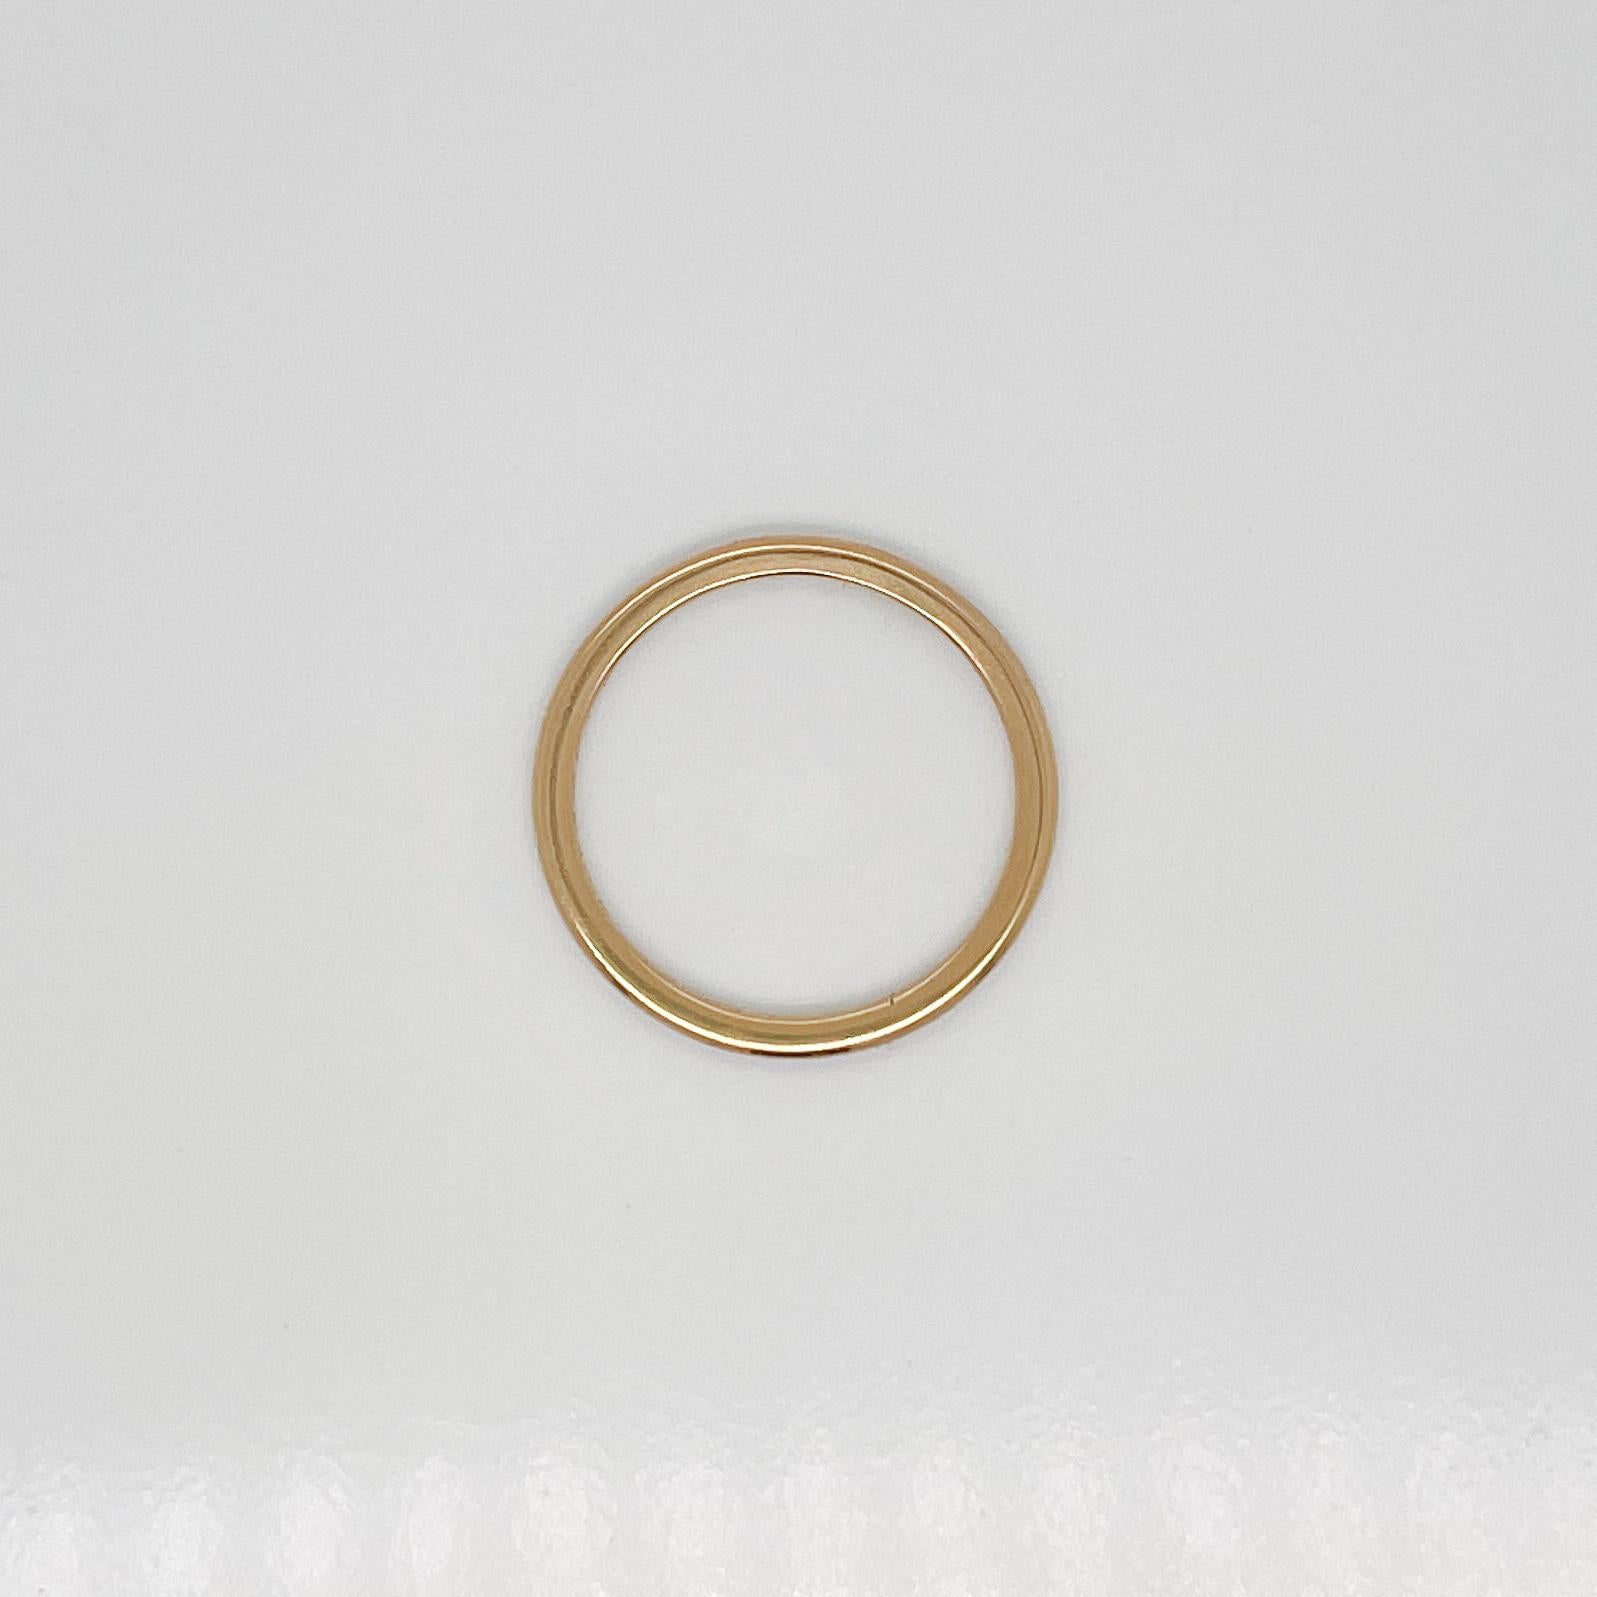 A fine vintage Tiffany & Co. gold ring

By Tiffany & Co.

In 18K gold. 

With an inscription to the interior.

Simply a lovely gold band from Tiffany!

Date:
circa 1952

Overall Condition:
It is in overall good, as-pictured, used estate condition